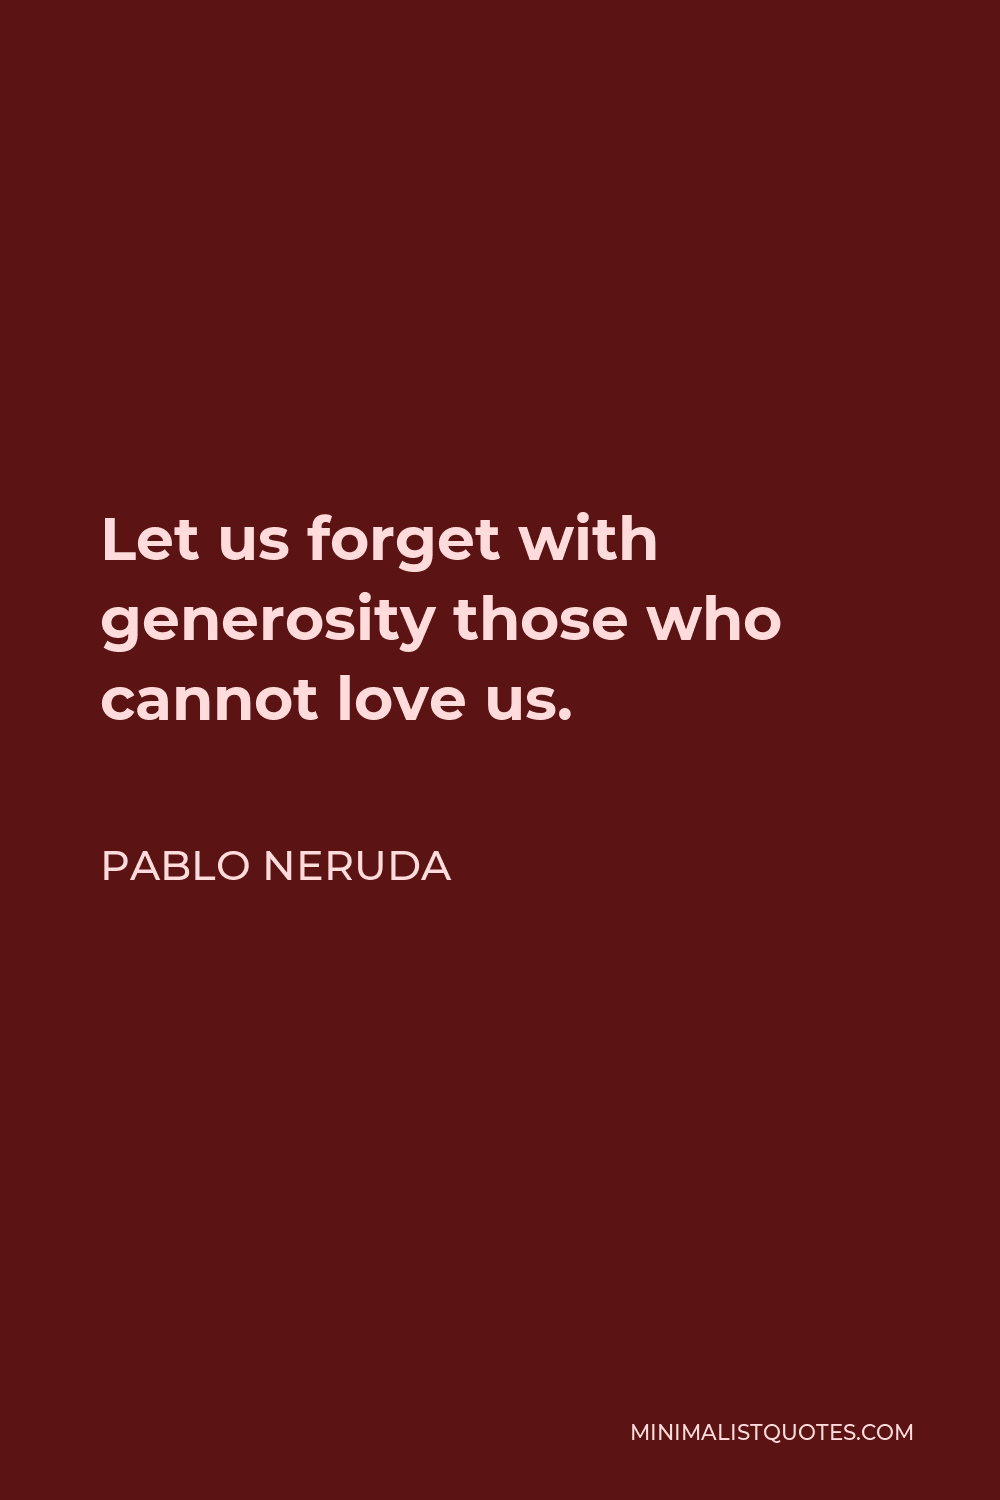 Pablo Neruda Quote - Let us forget with generosity those who cannot love us.